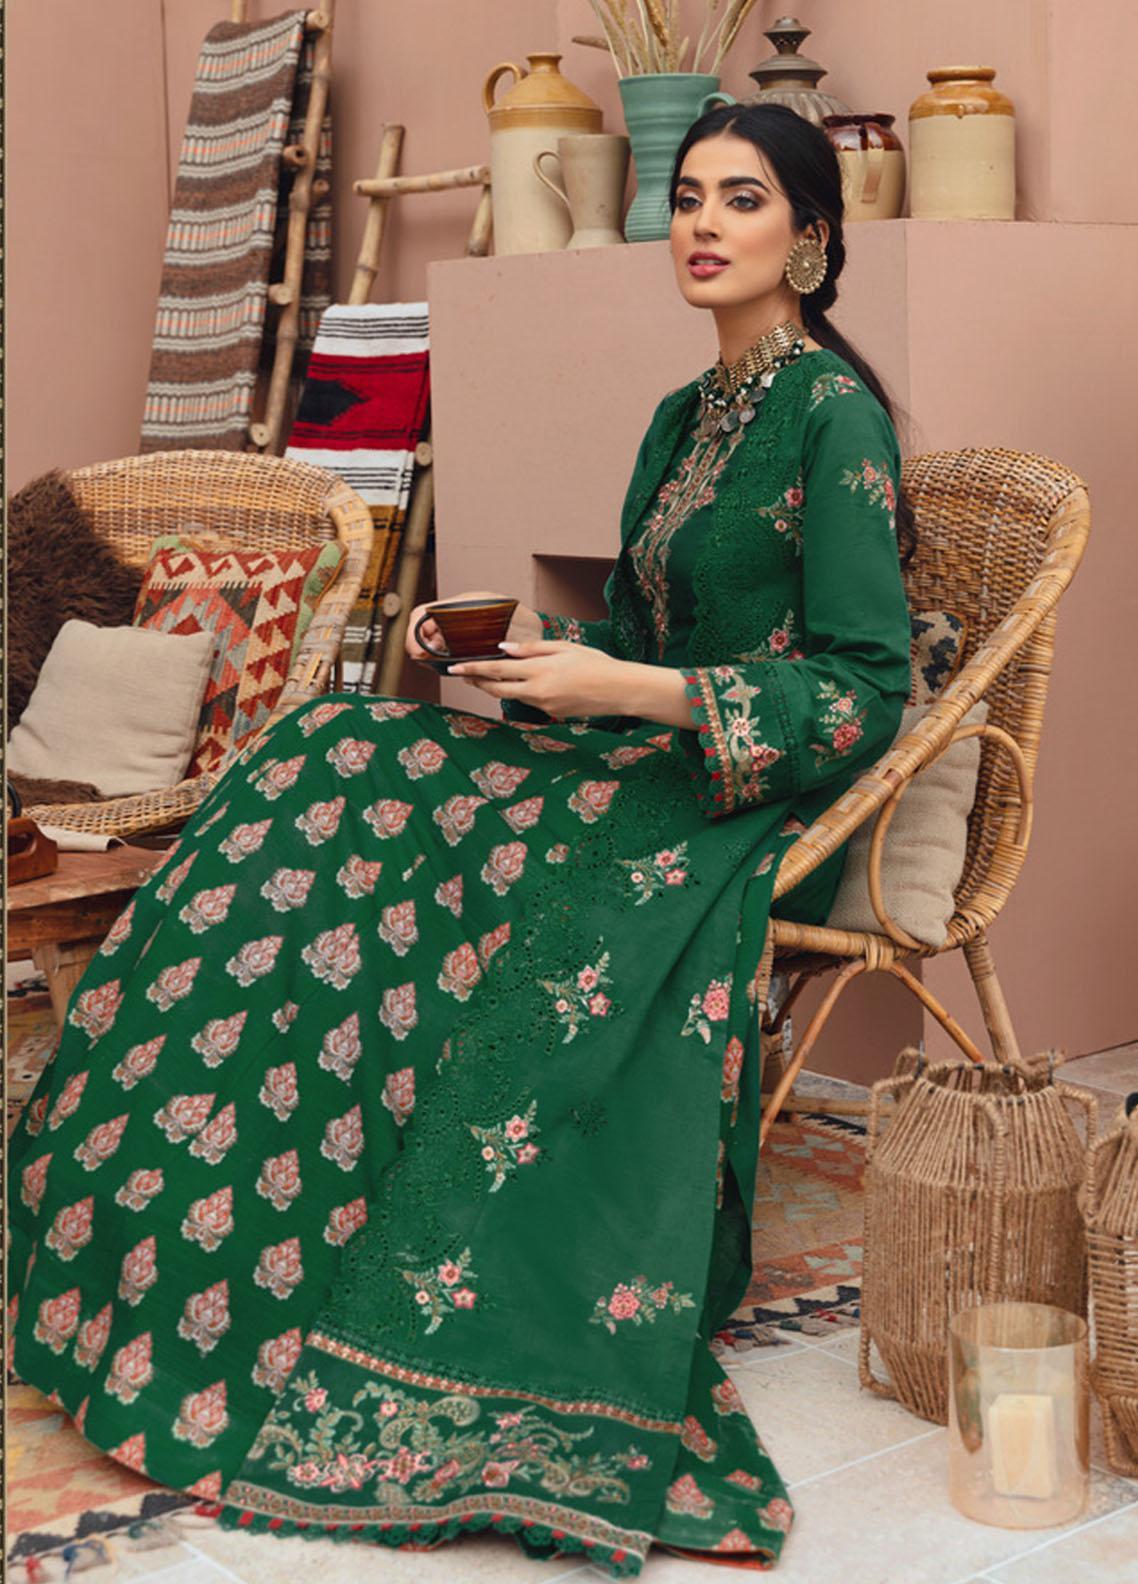 noor-by-saadia-asad-embroidered-shawls-2021-collection-03-_02